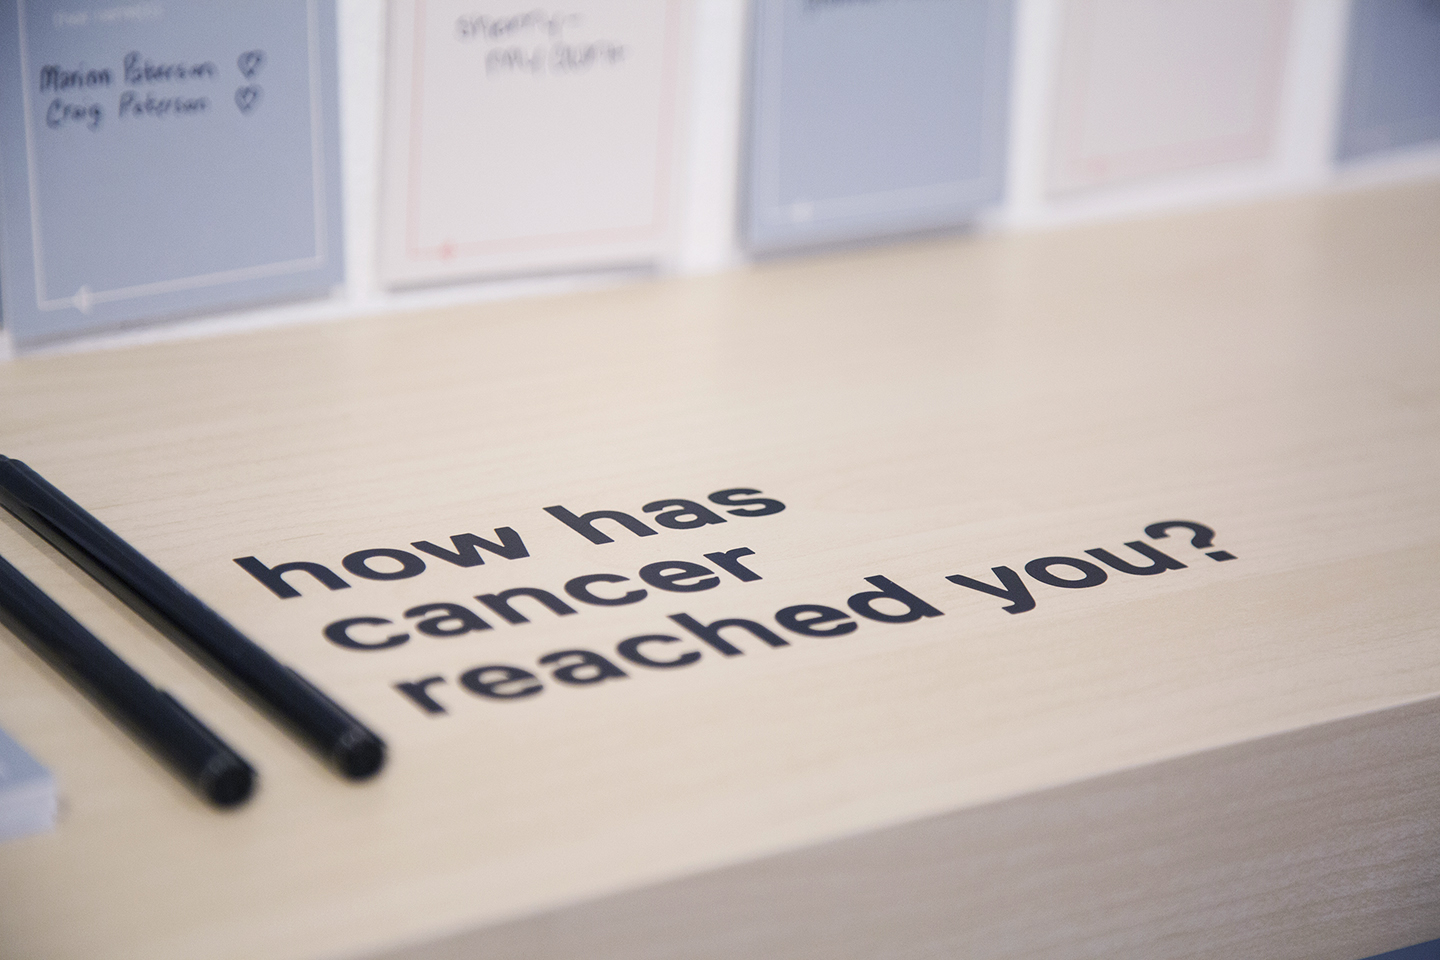 Black letters on a wooden shelf ask visitors 'how has cancer reached you?'